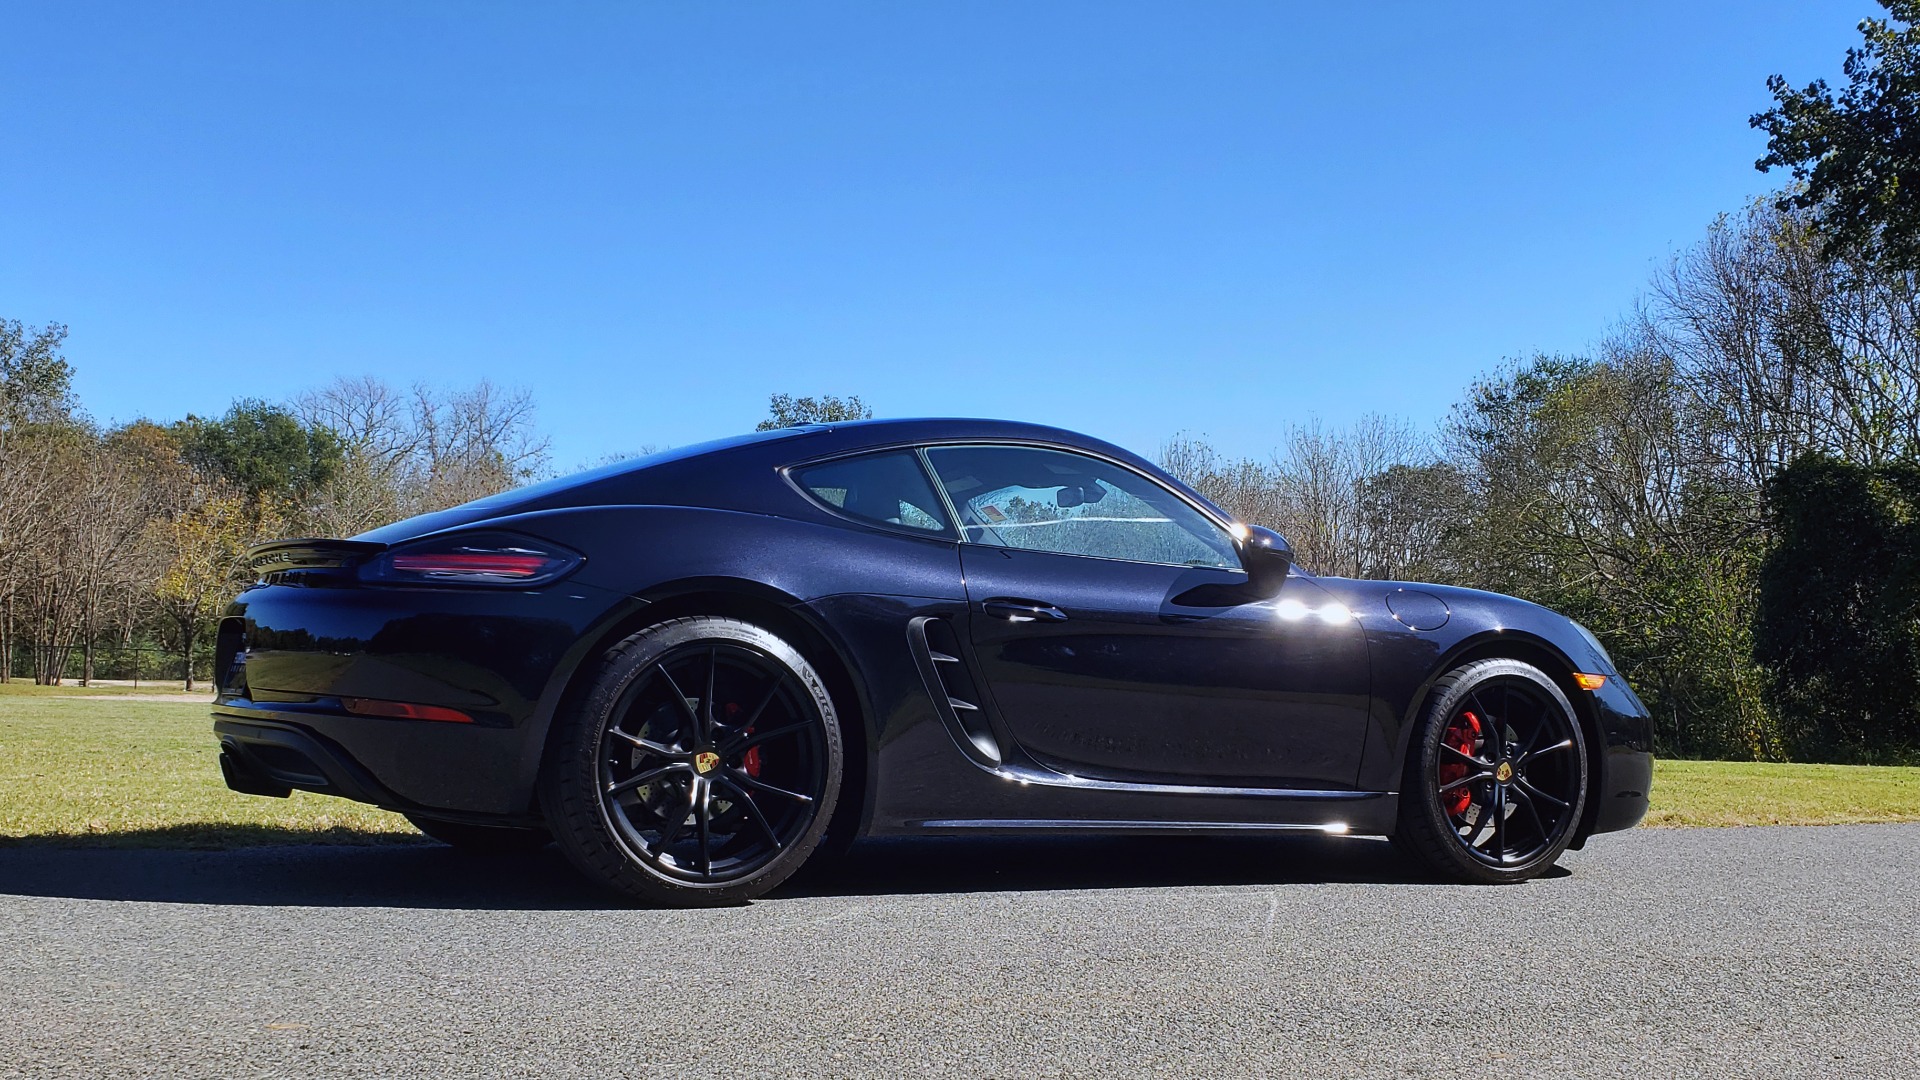 Used 2019 Porsche 718 CAYMAN S COUPE / PDK TRANS / LCA / BOSE / HTD STS / LIGHT DESIGN PKG for sale Sold at Formula Imports in Charlotte NC 28227 10